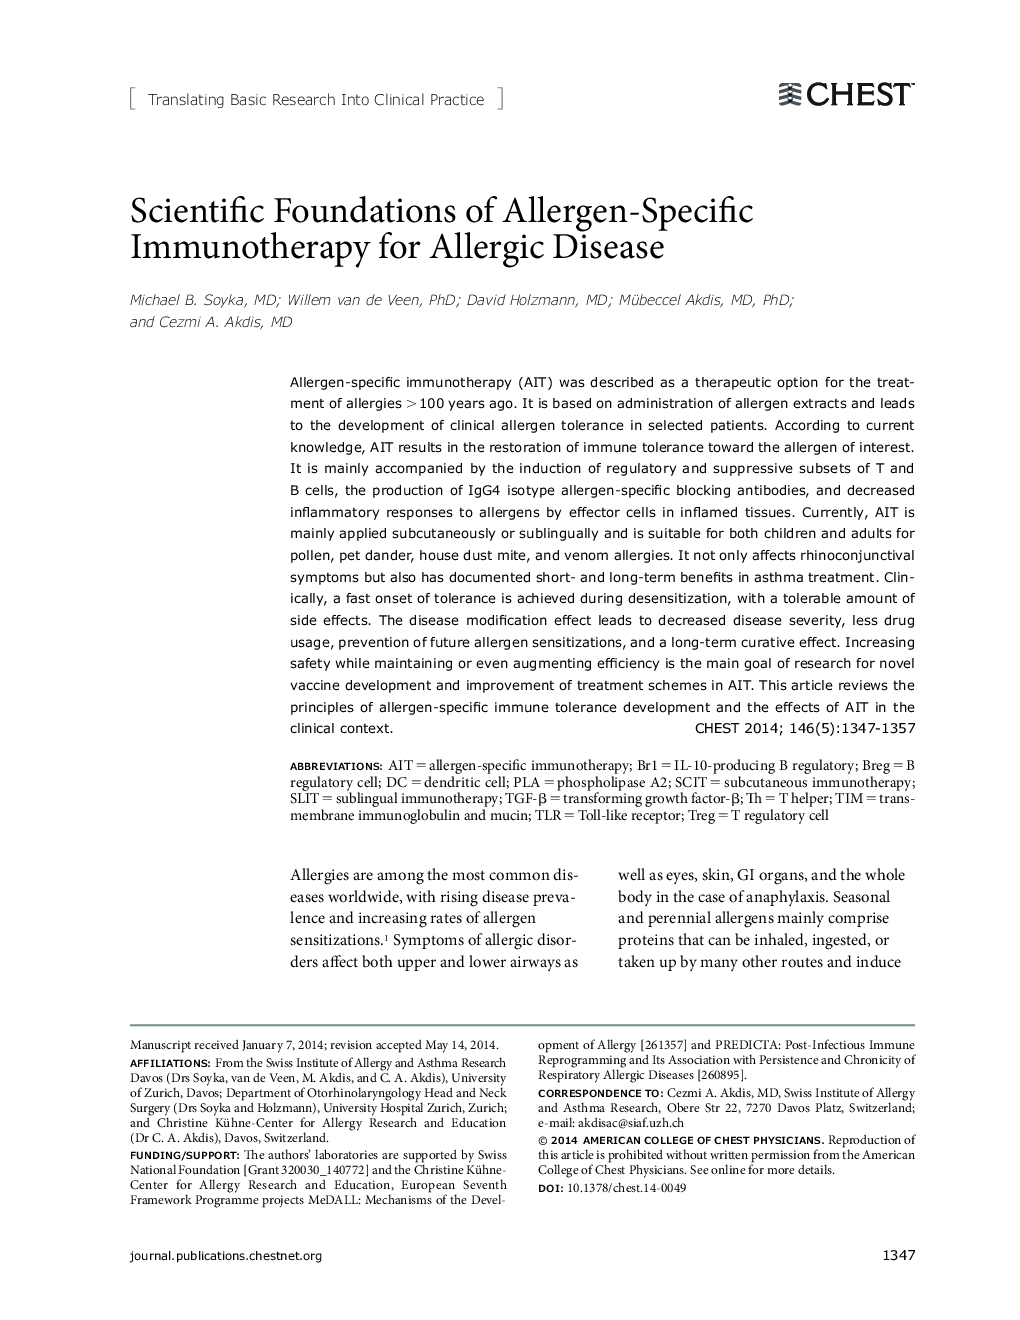 Translating Basic Research Into Clinical PracticeScientific Foundations of Allergen-Specific Immunotherapy for Allergic Disease